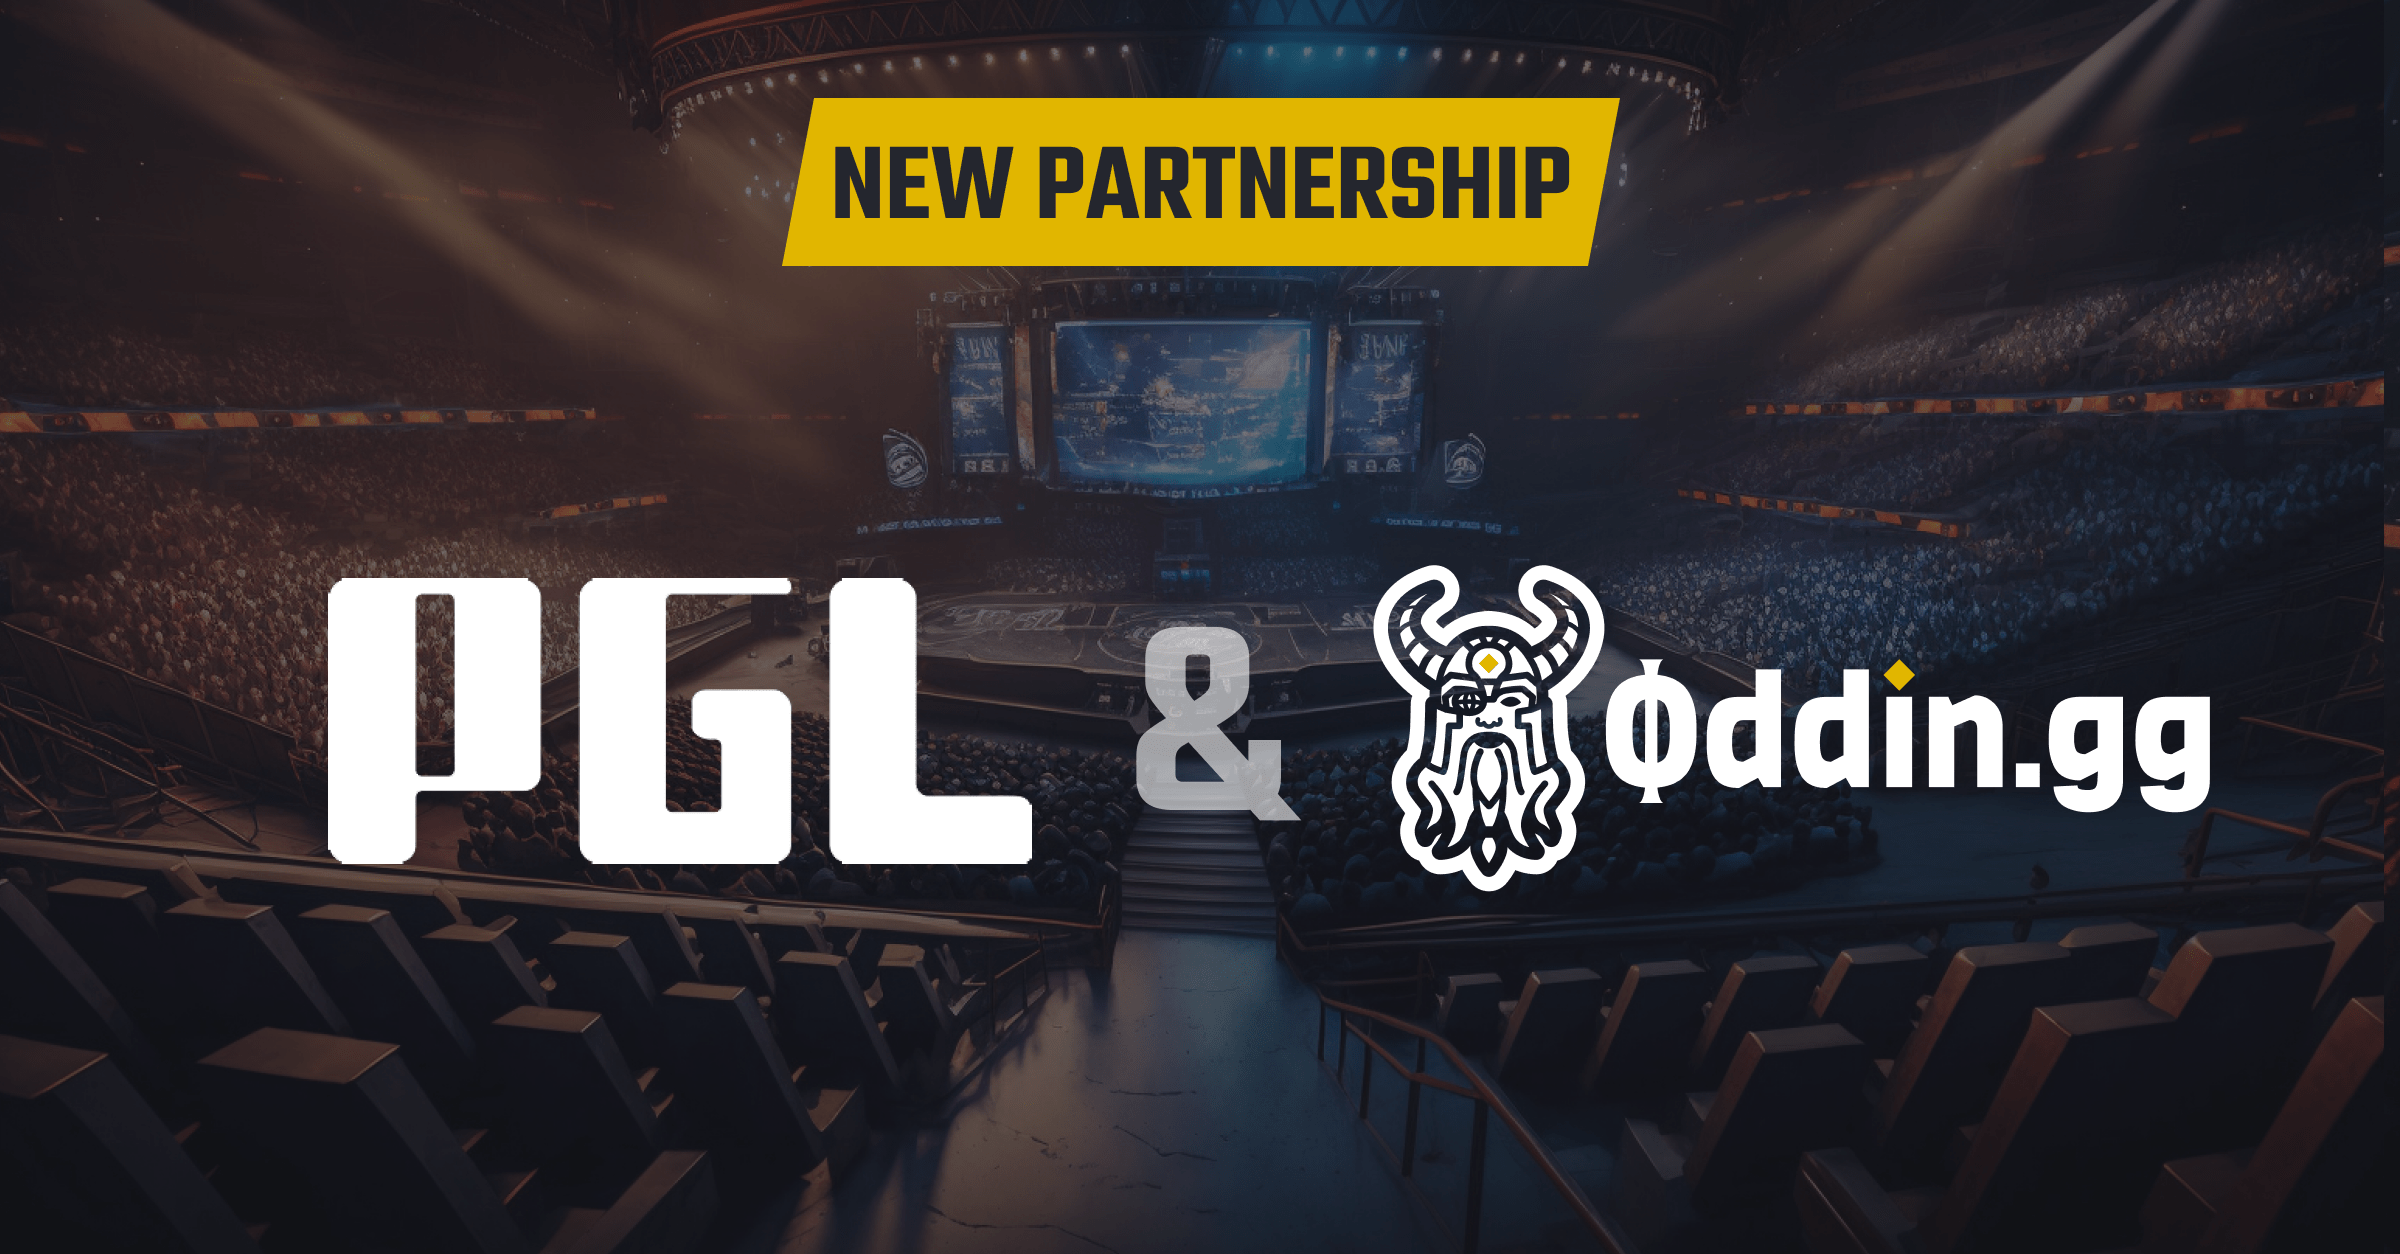 oddin.gg-secures-a-landmark-official-data-rights-deal-for-the-first-ever-counter-strike-2-major